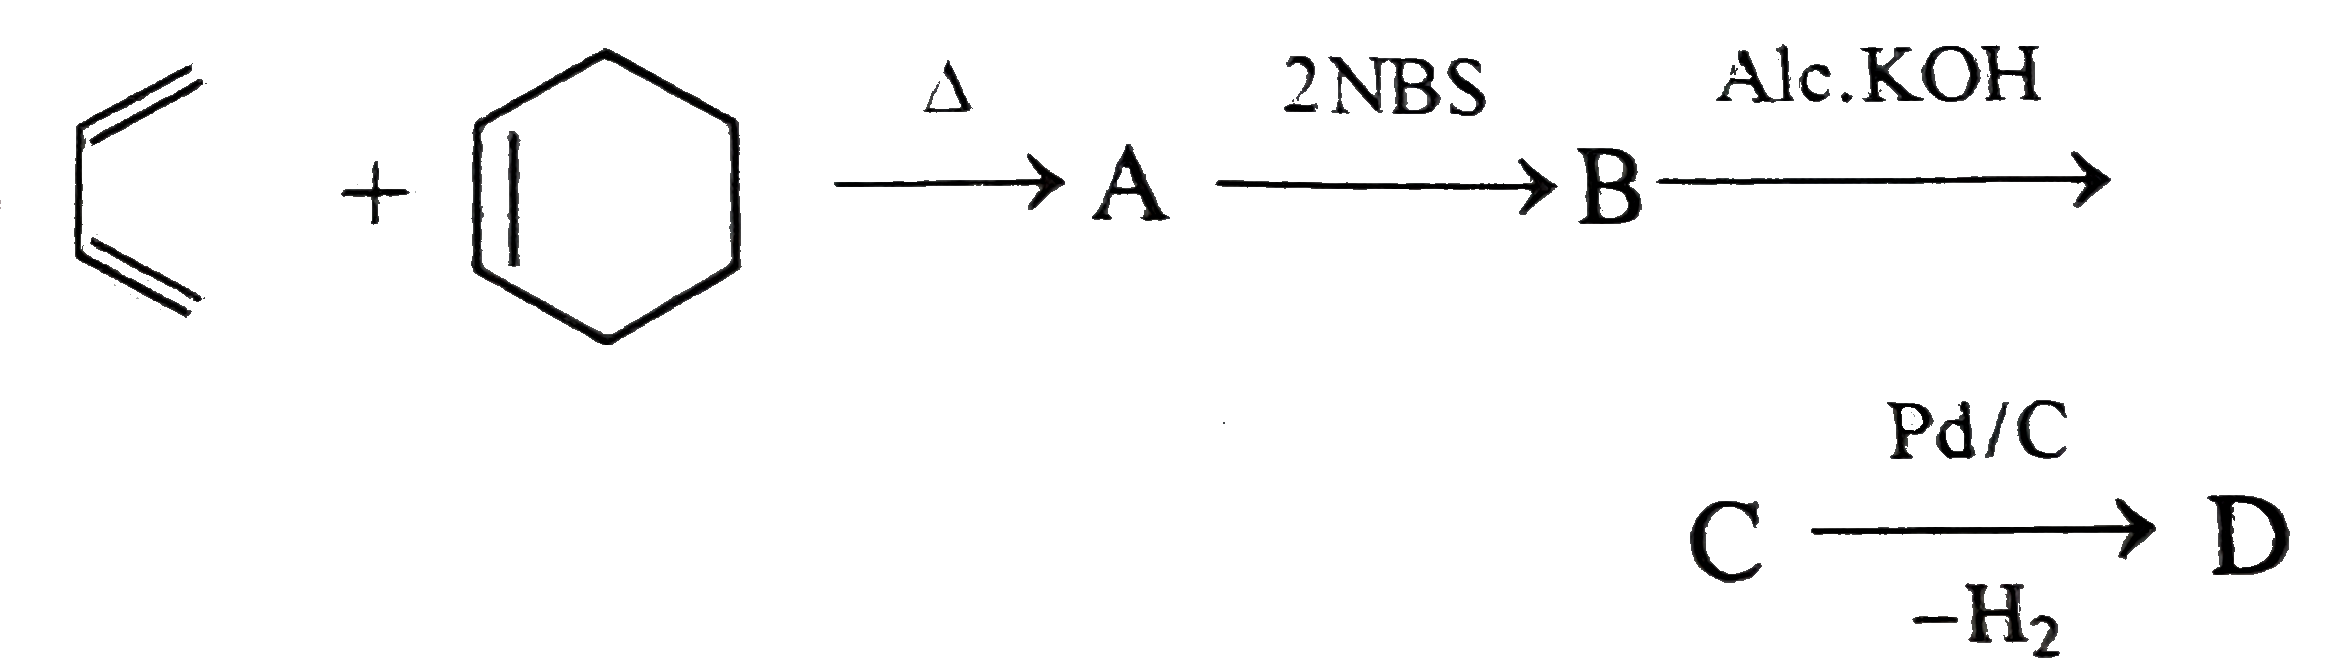 The end product D formed in this sequence of reactions is